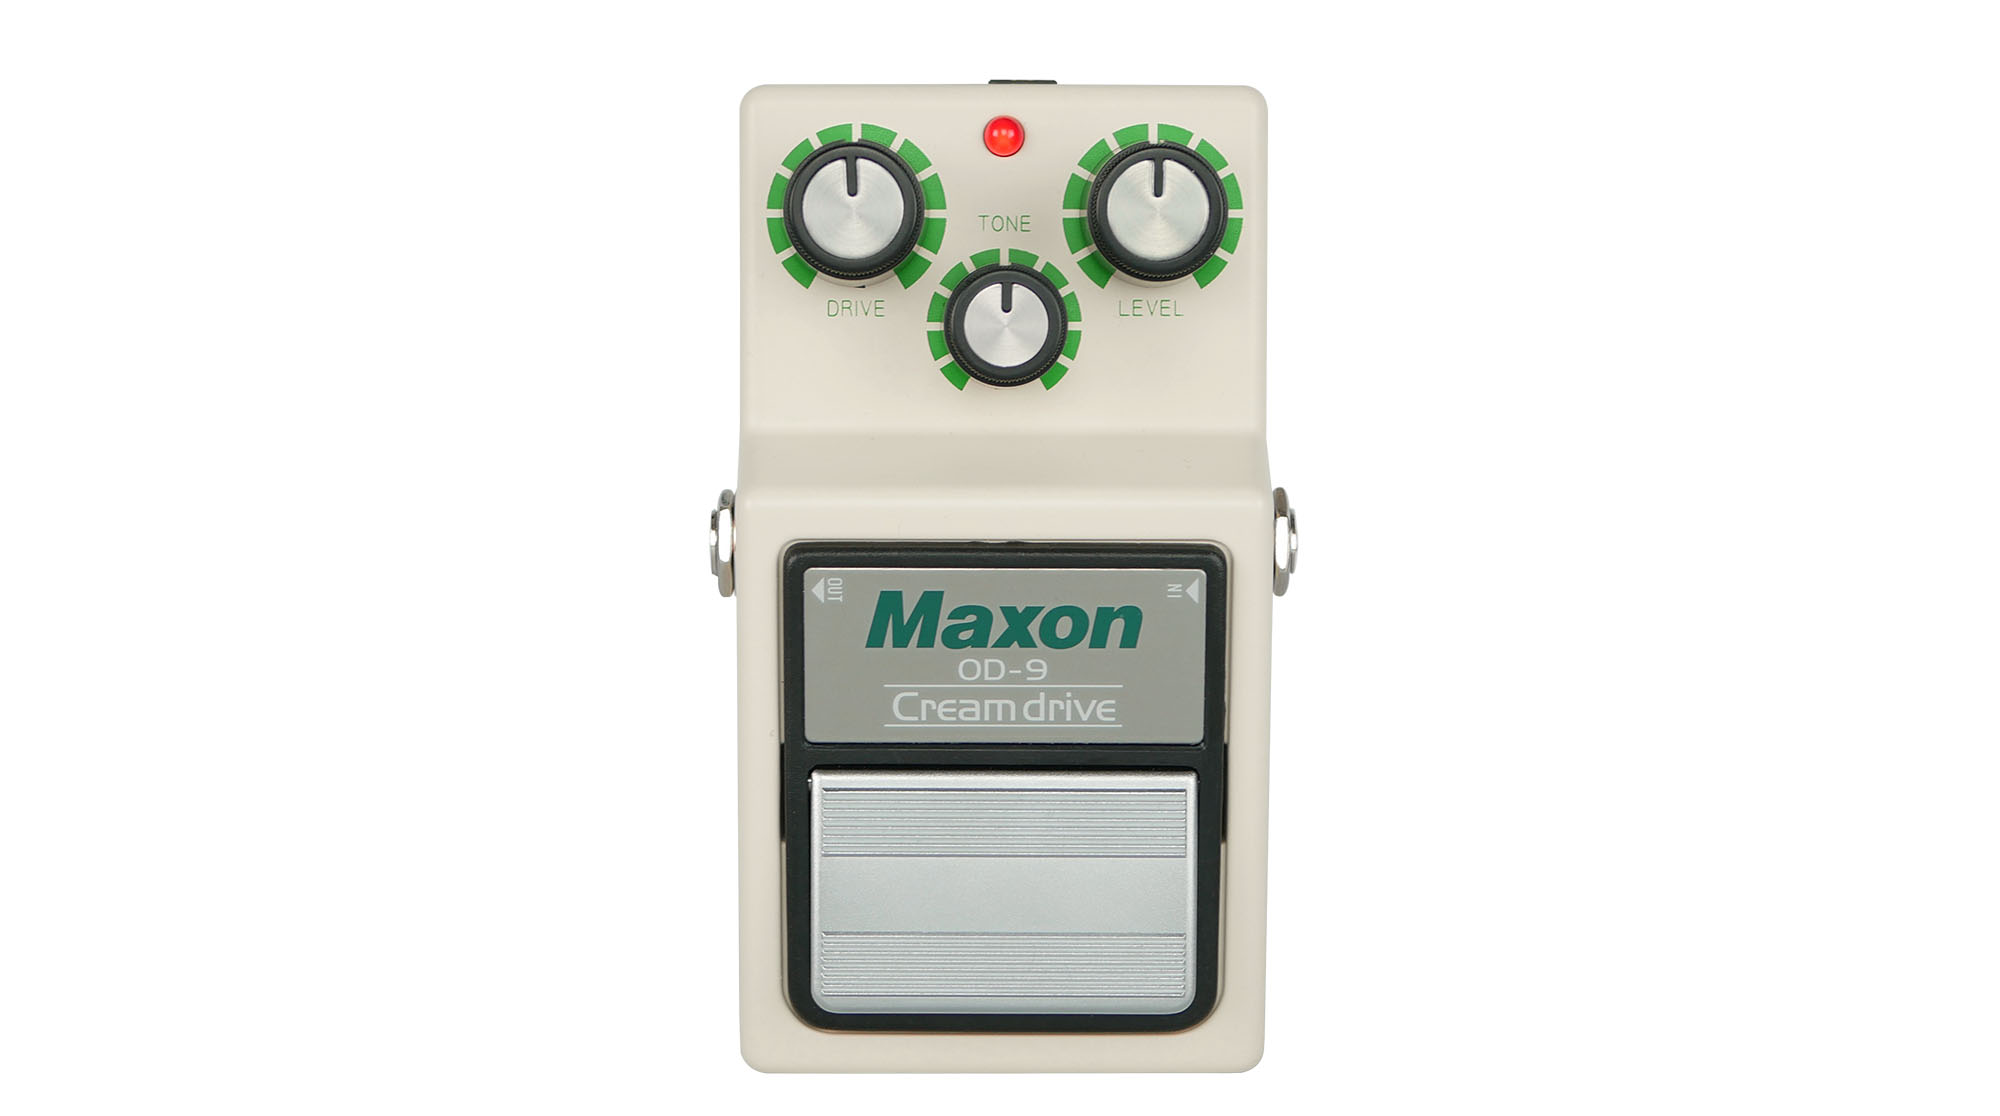 Maxon's OD-9 Creamdrive gives the Tube Screamer a limited-edition